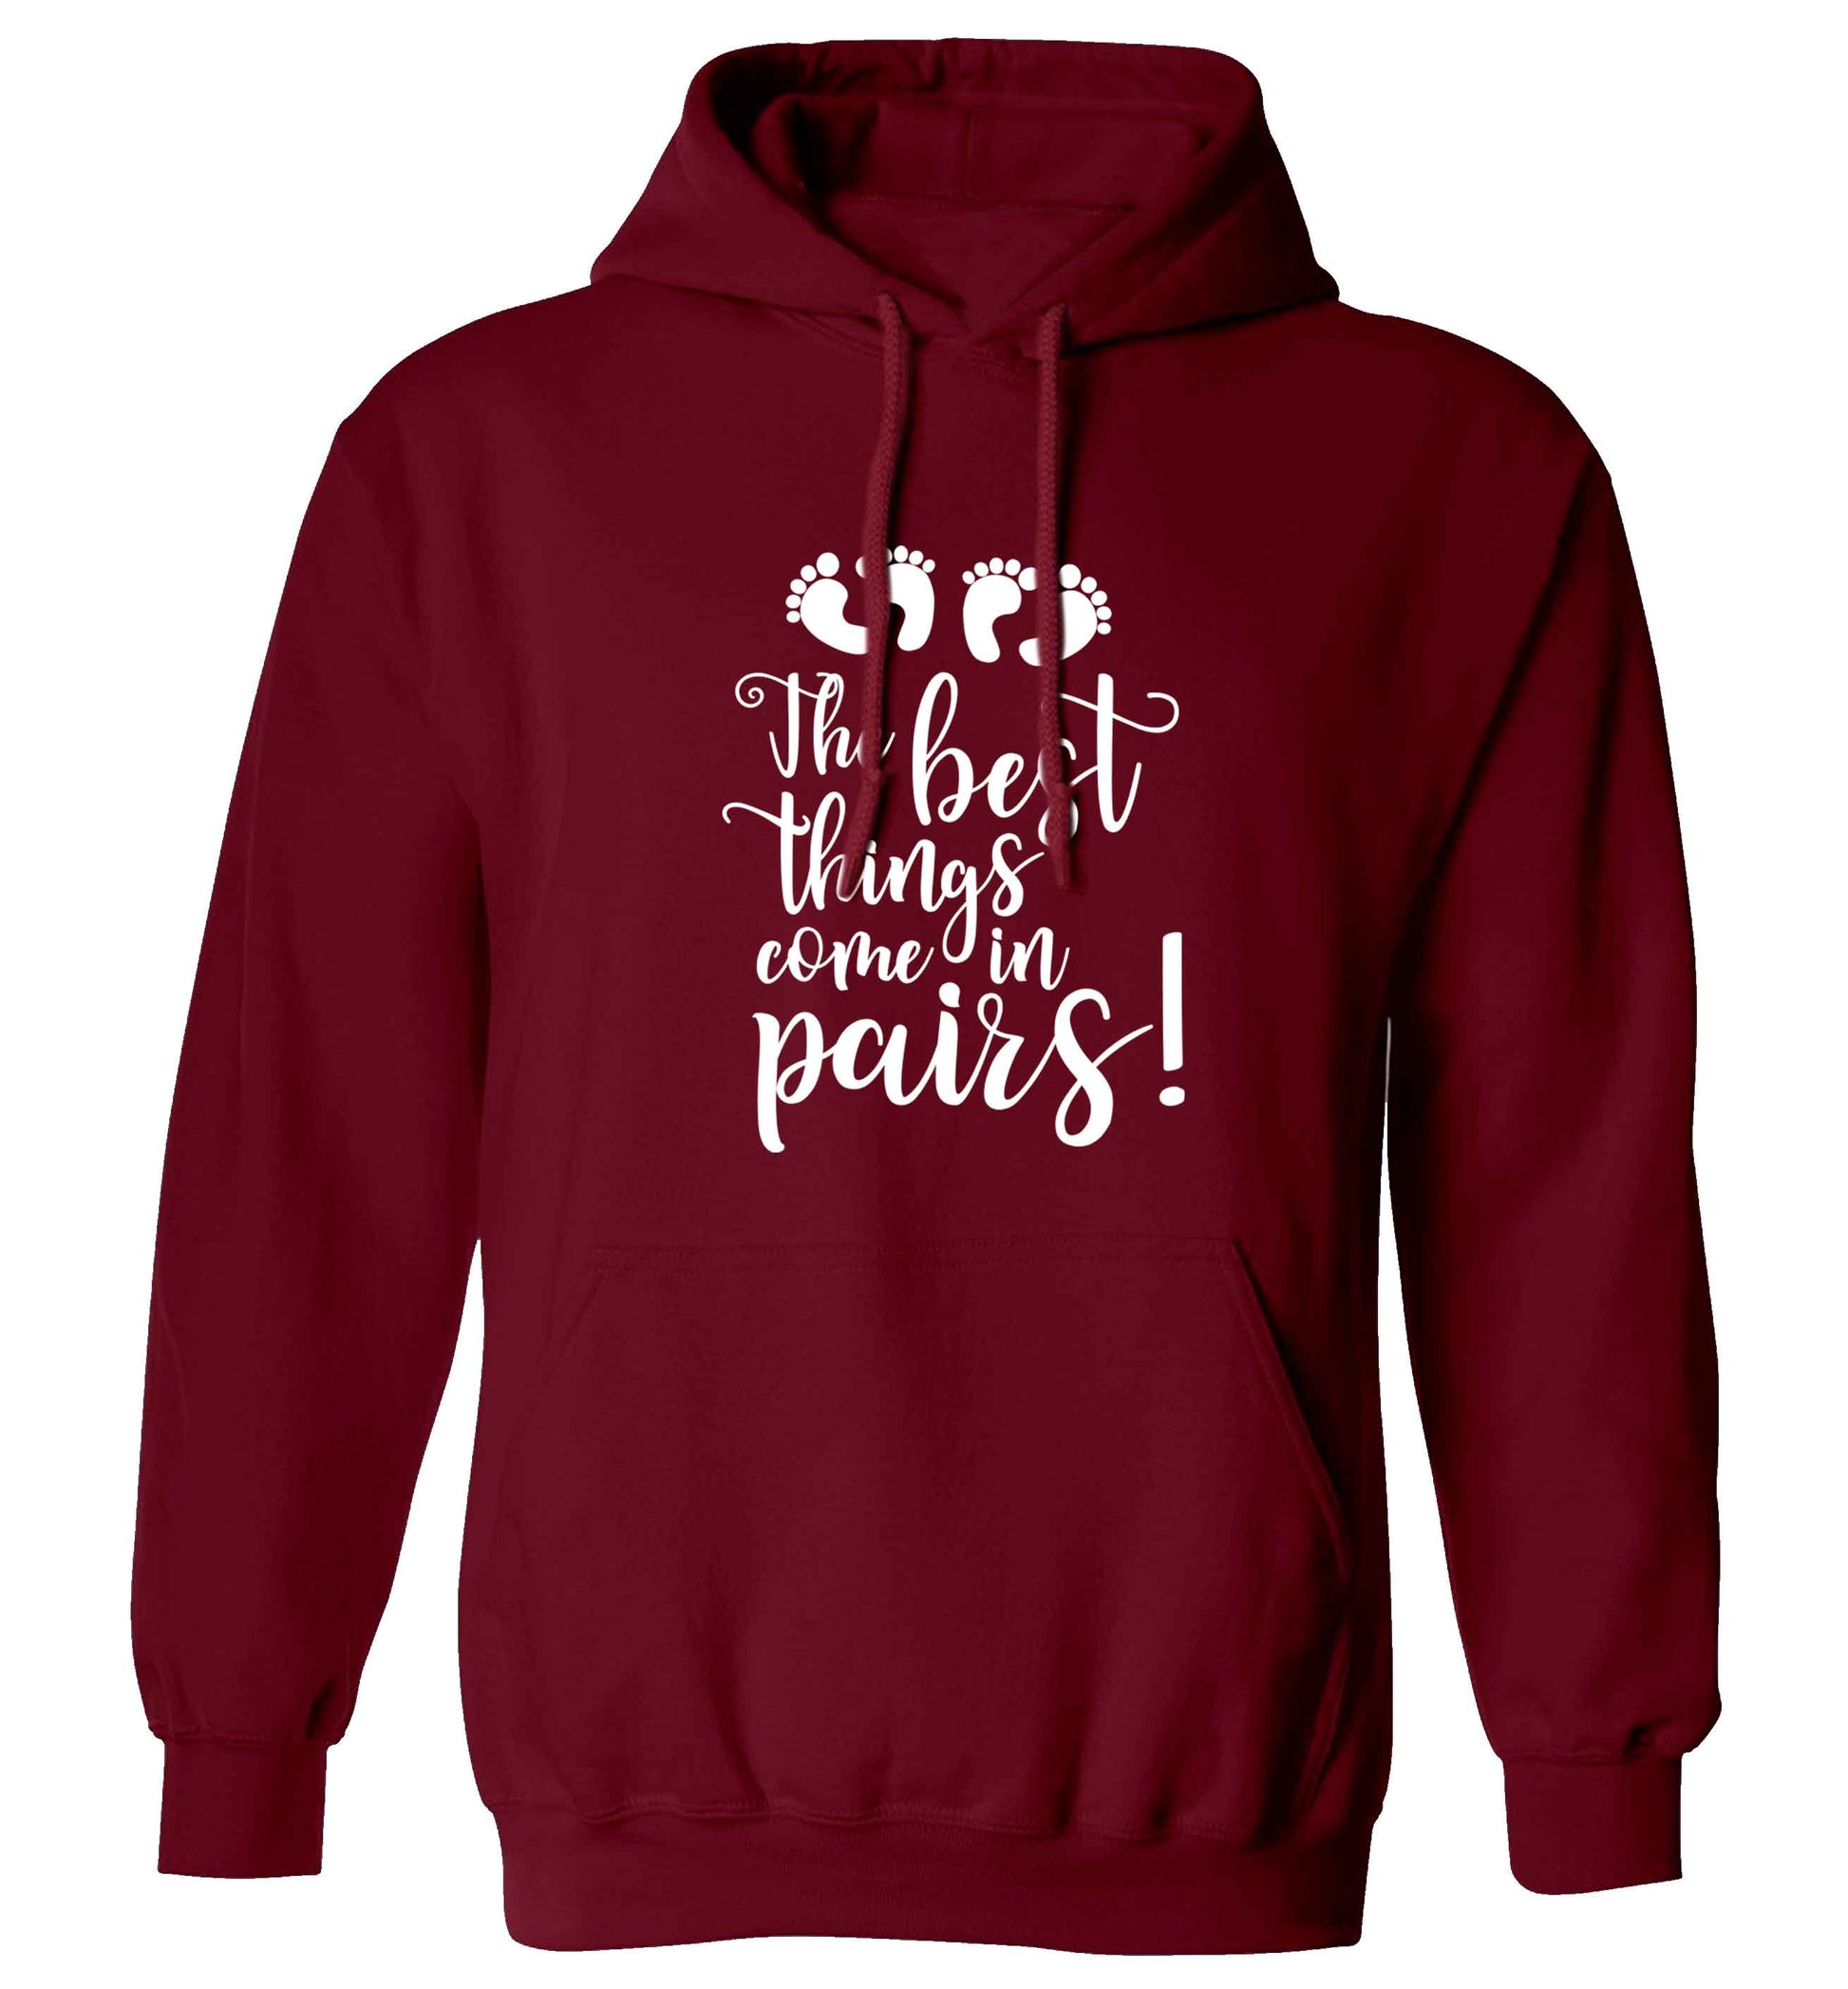 The best things come in pairs! adults unisex maroon hoodie 2XL